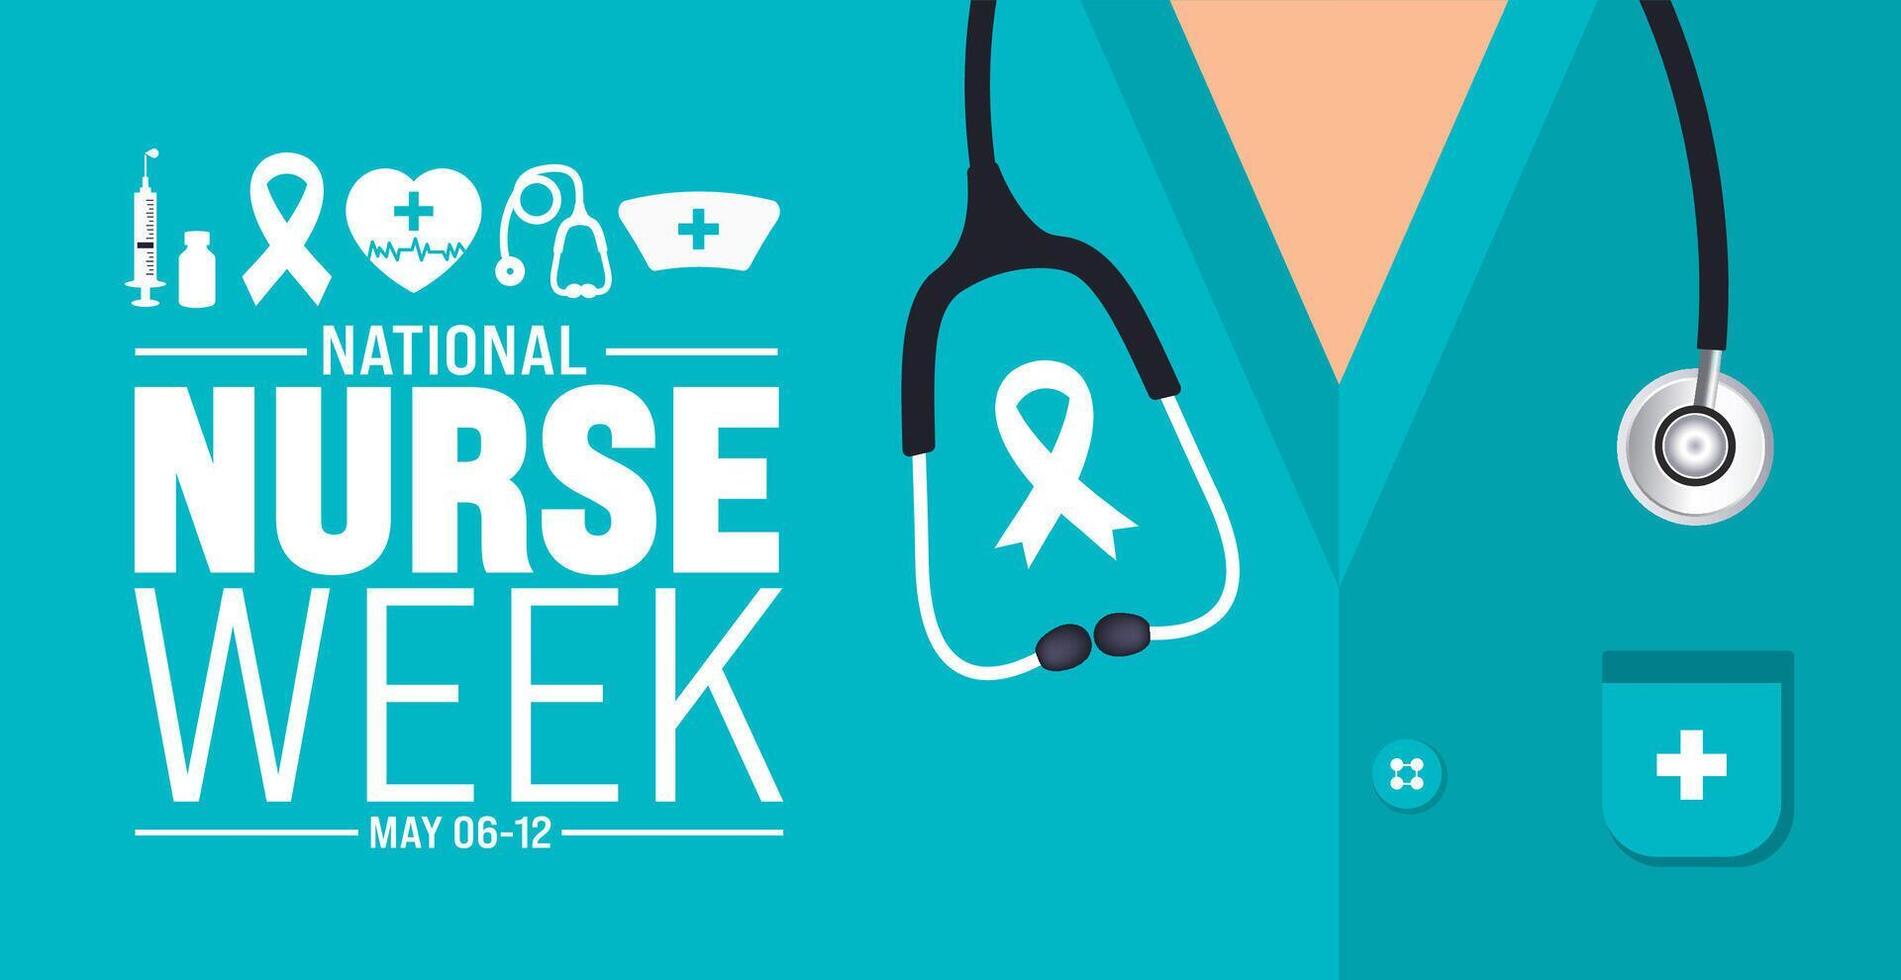 6th to 12th May is National nurses week background template. nurse dress, medical instrument, medicine, Medical and health care concept. Celebrated annually in United States. Thank you nurses. vector